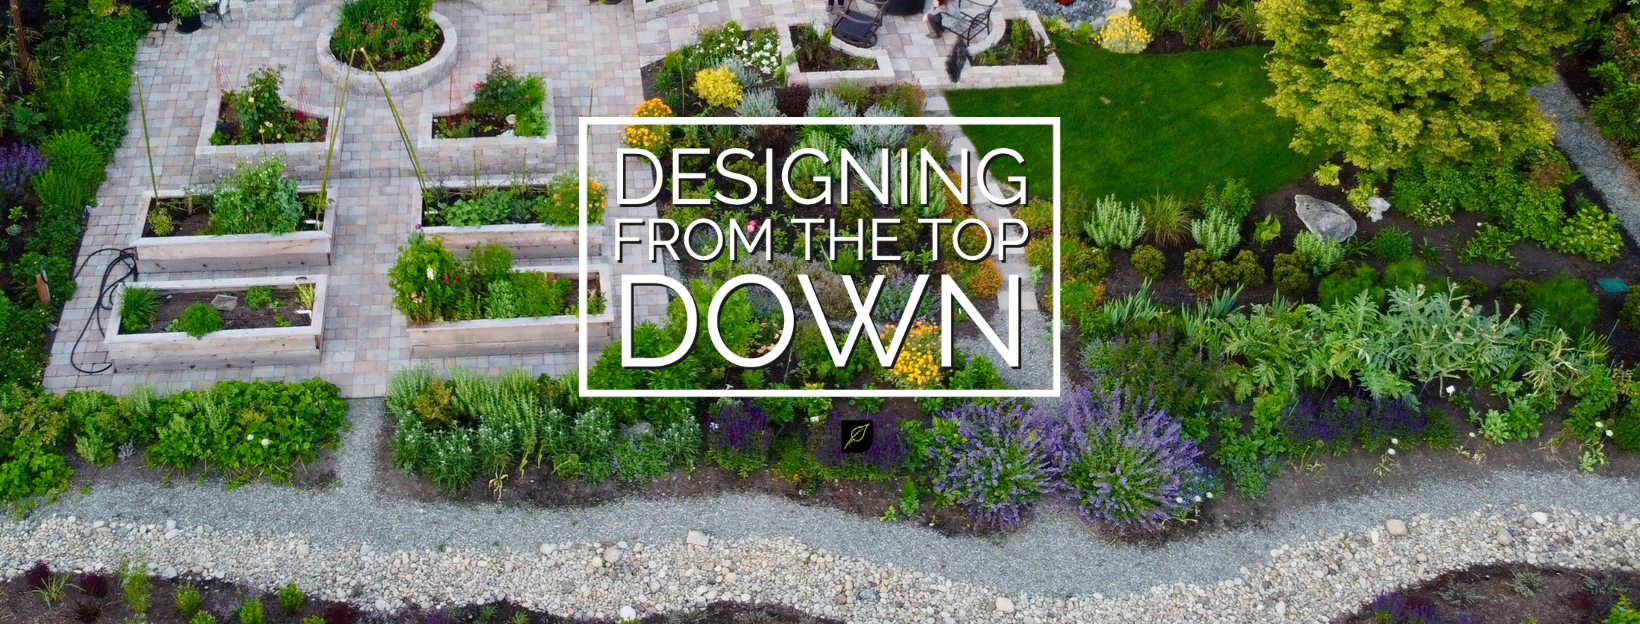 designing from the top down plantswoman design title 004